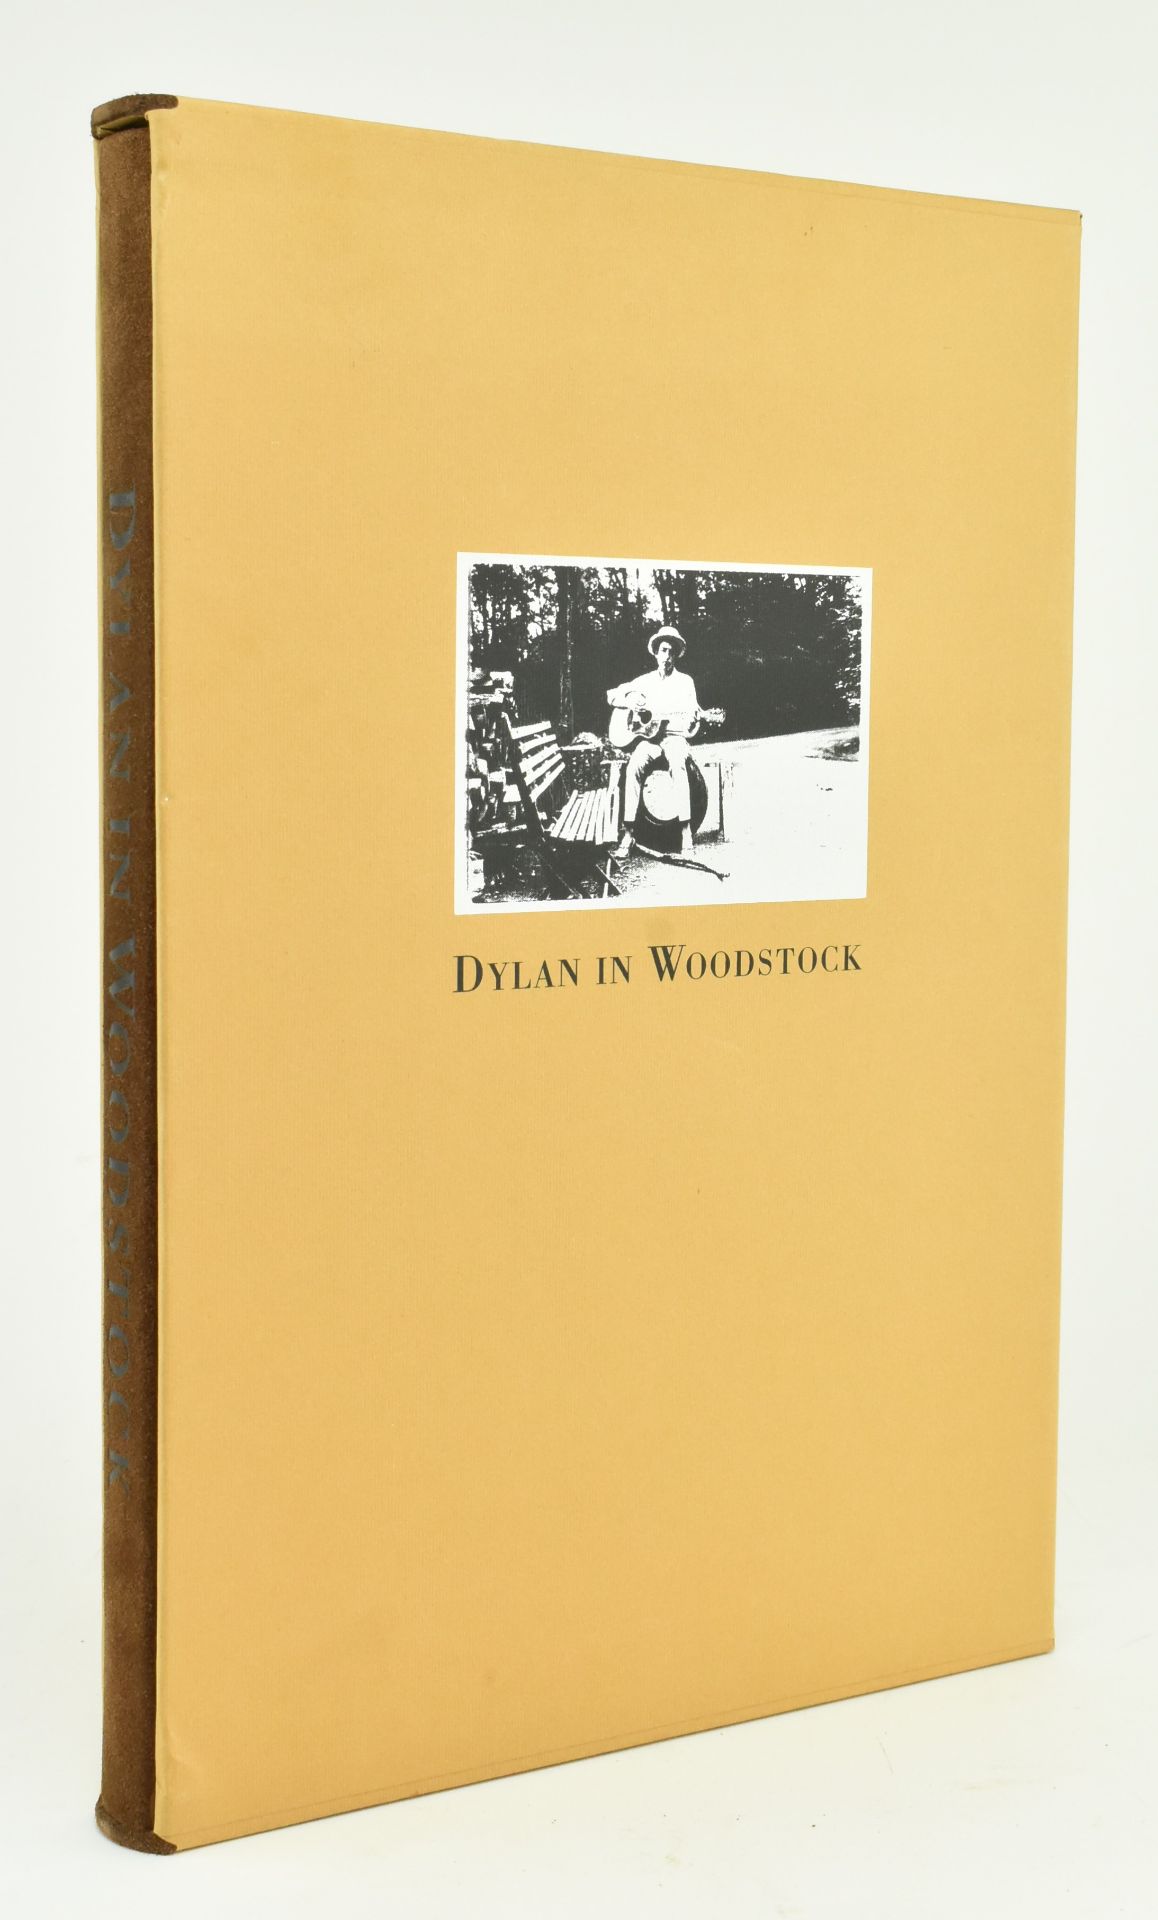 DYLAN IN WOODSTOCK. SIGNED LIMITED EDITION BY ELLIOT LANDY